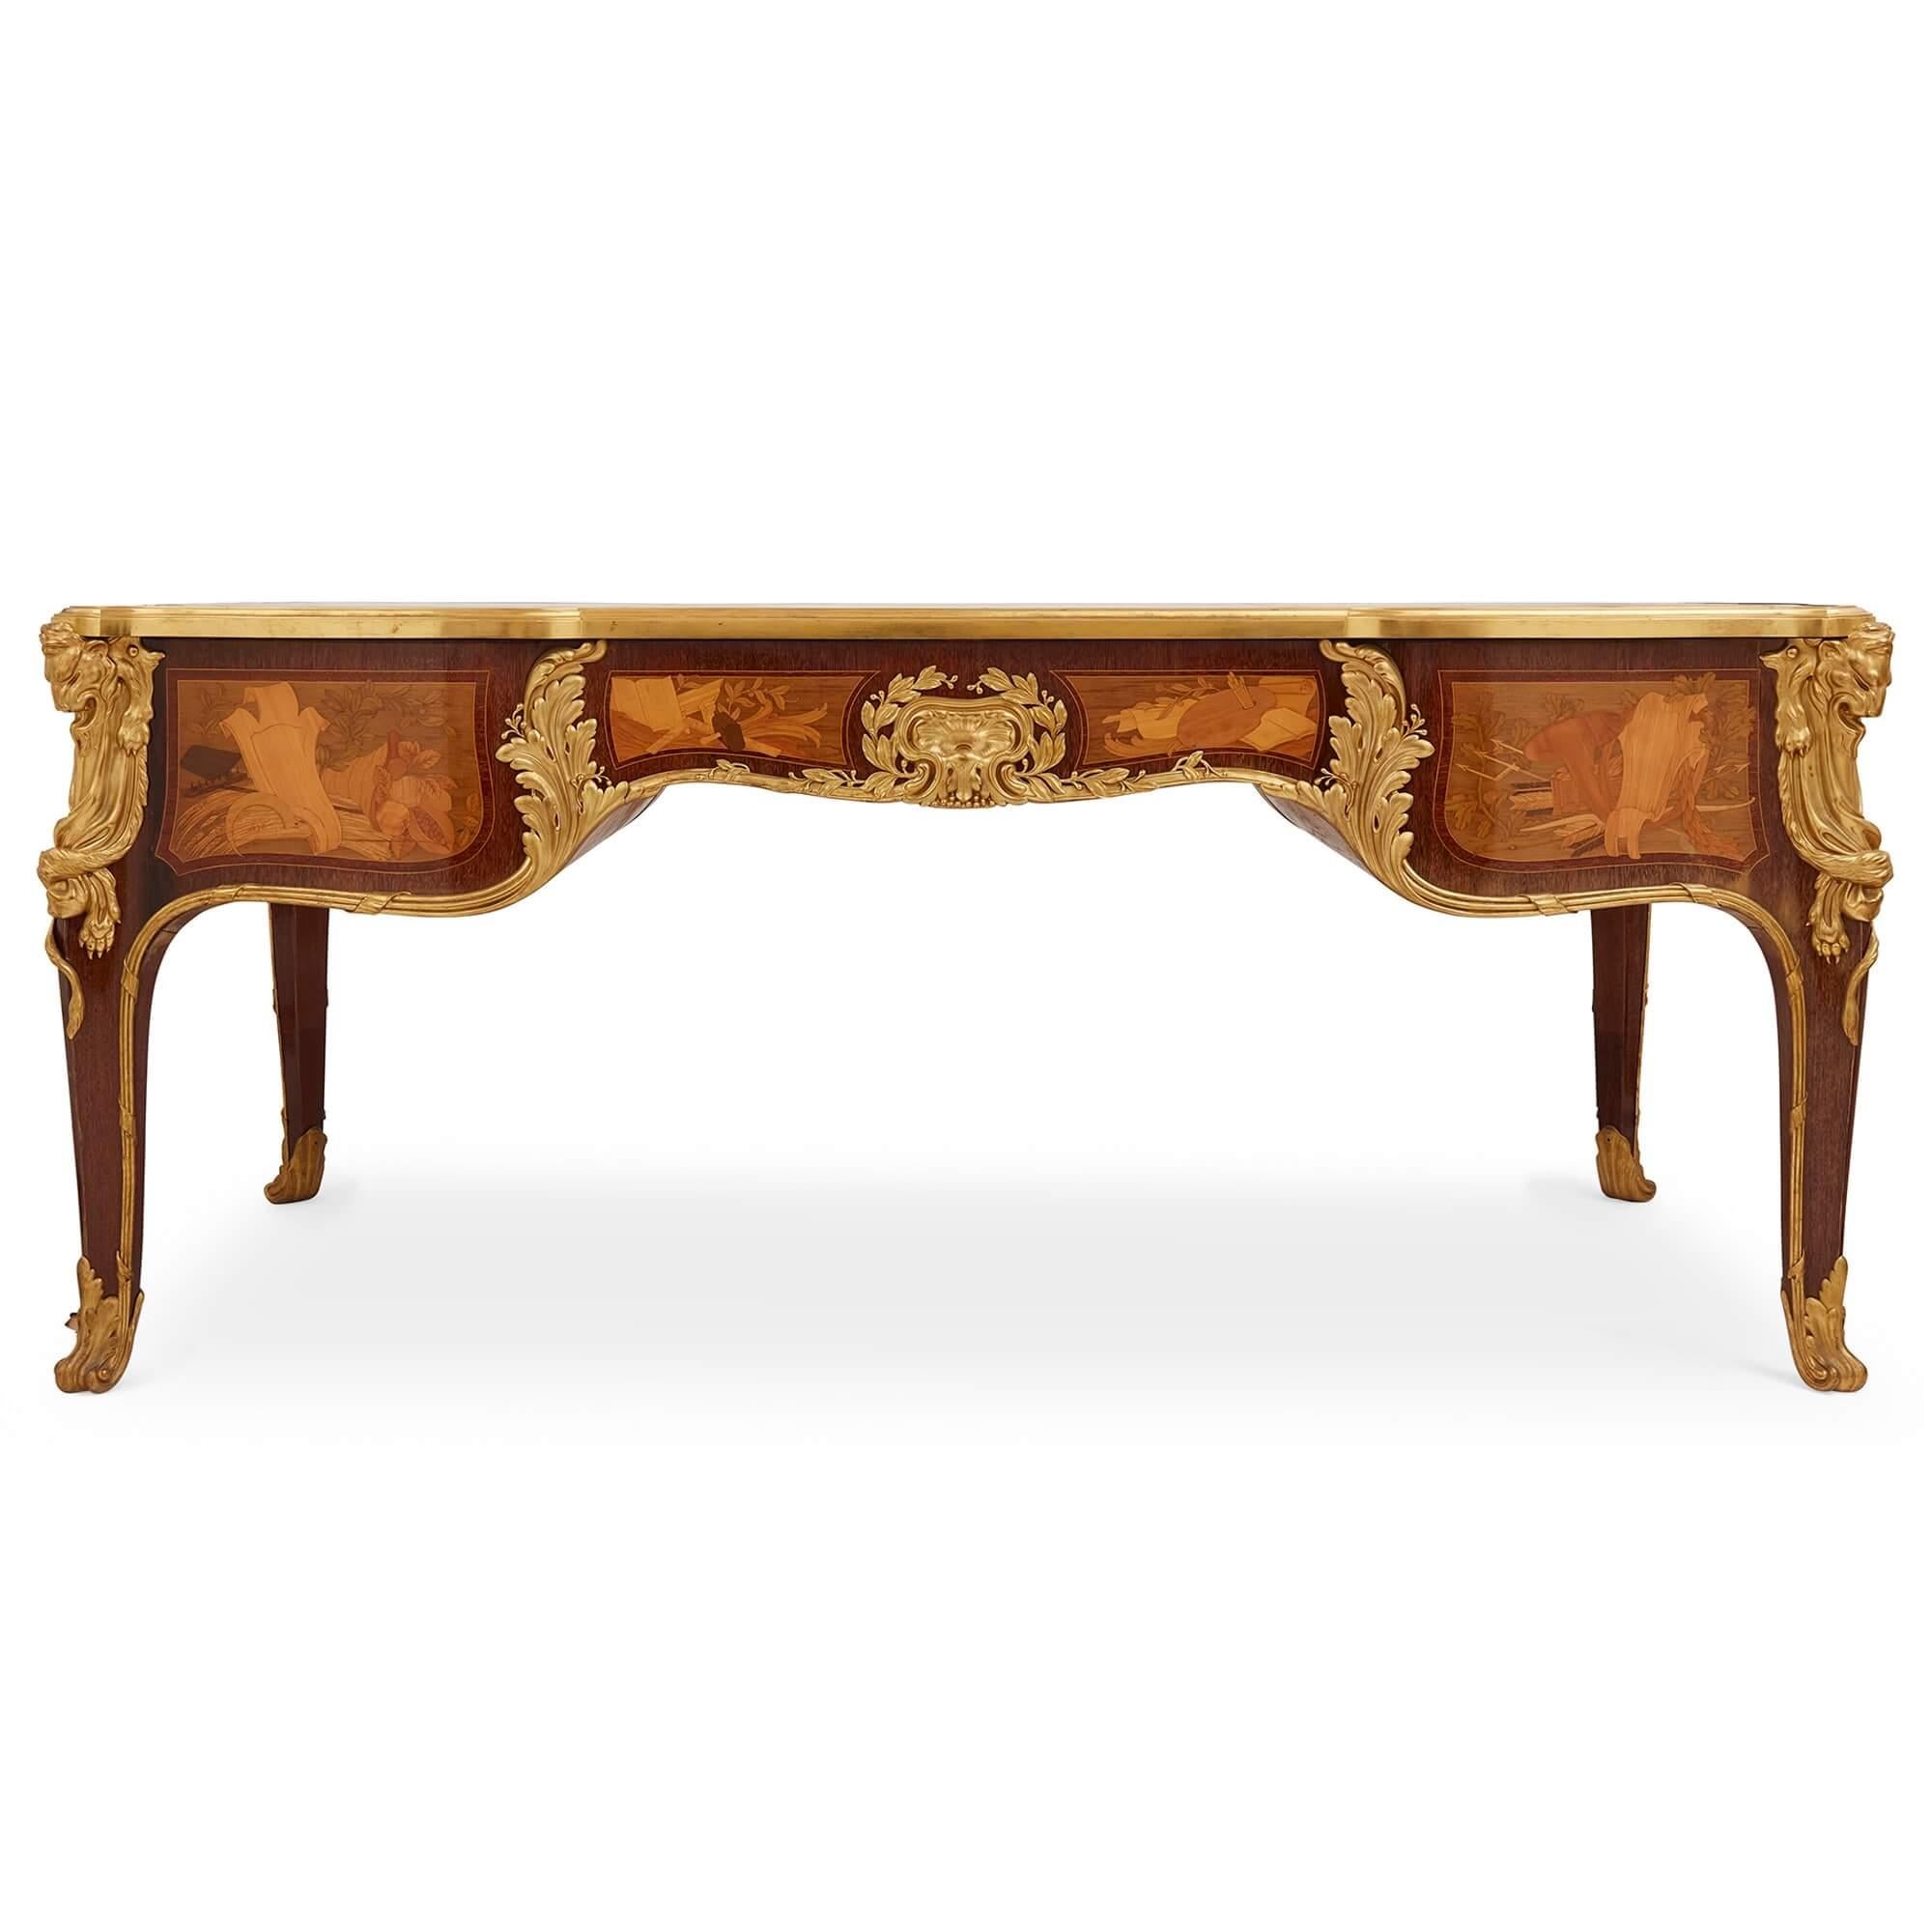 Cast Antique French Louis XV Style Ormolu Mounted Marquetry Desk by Maison Léger For Sale